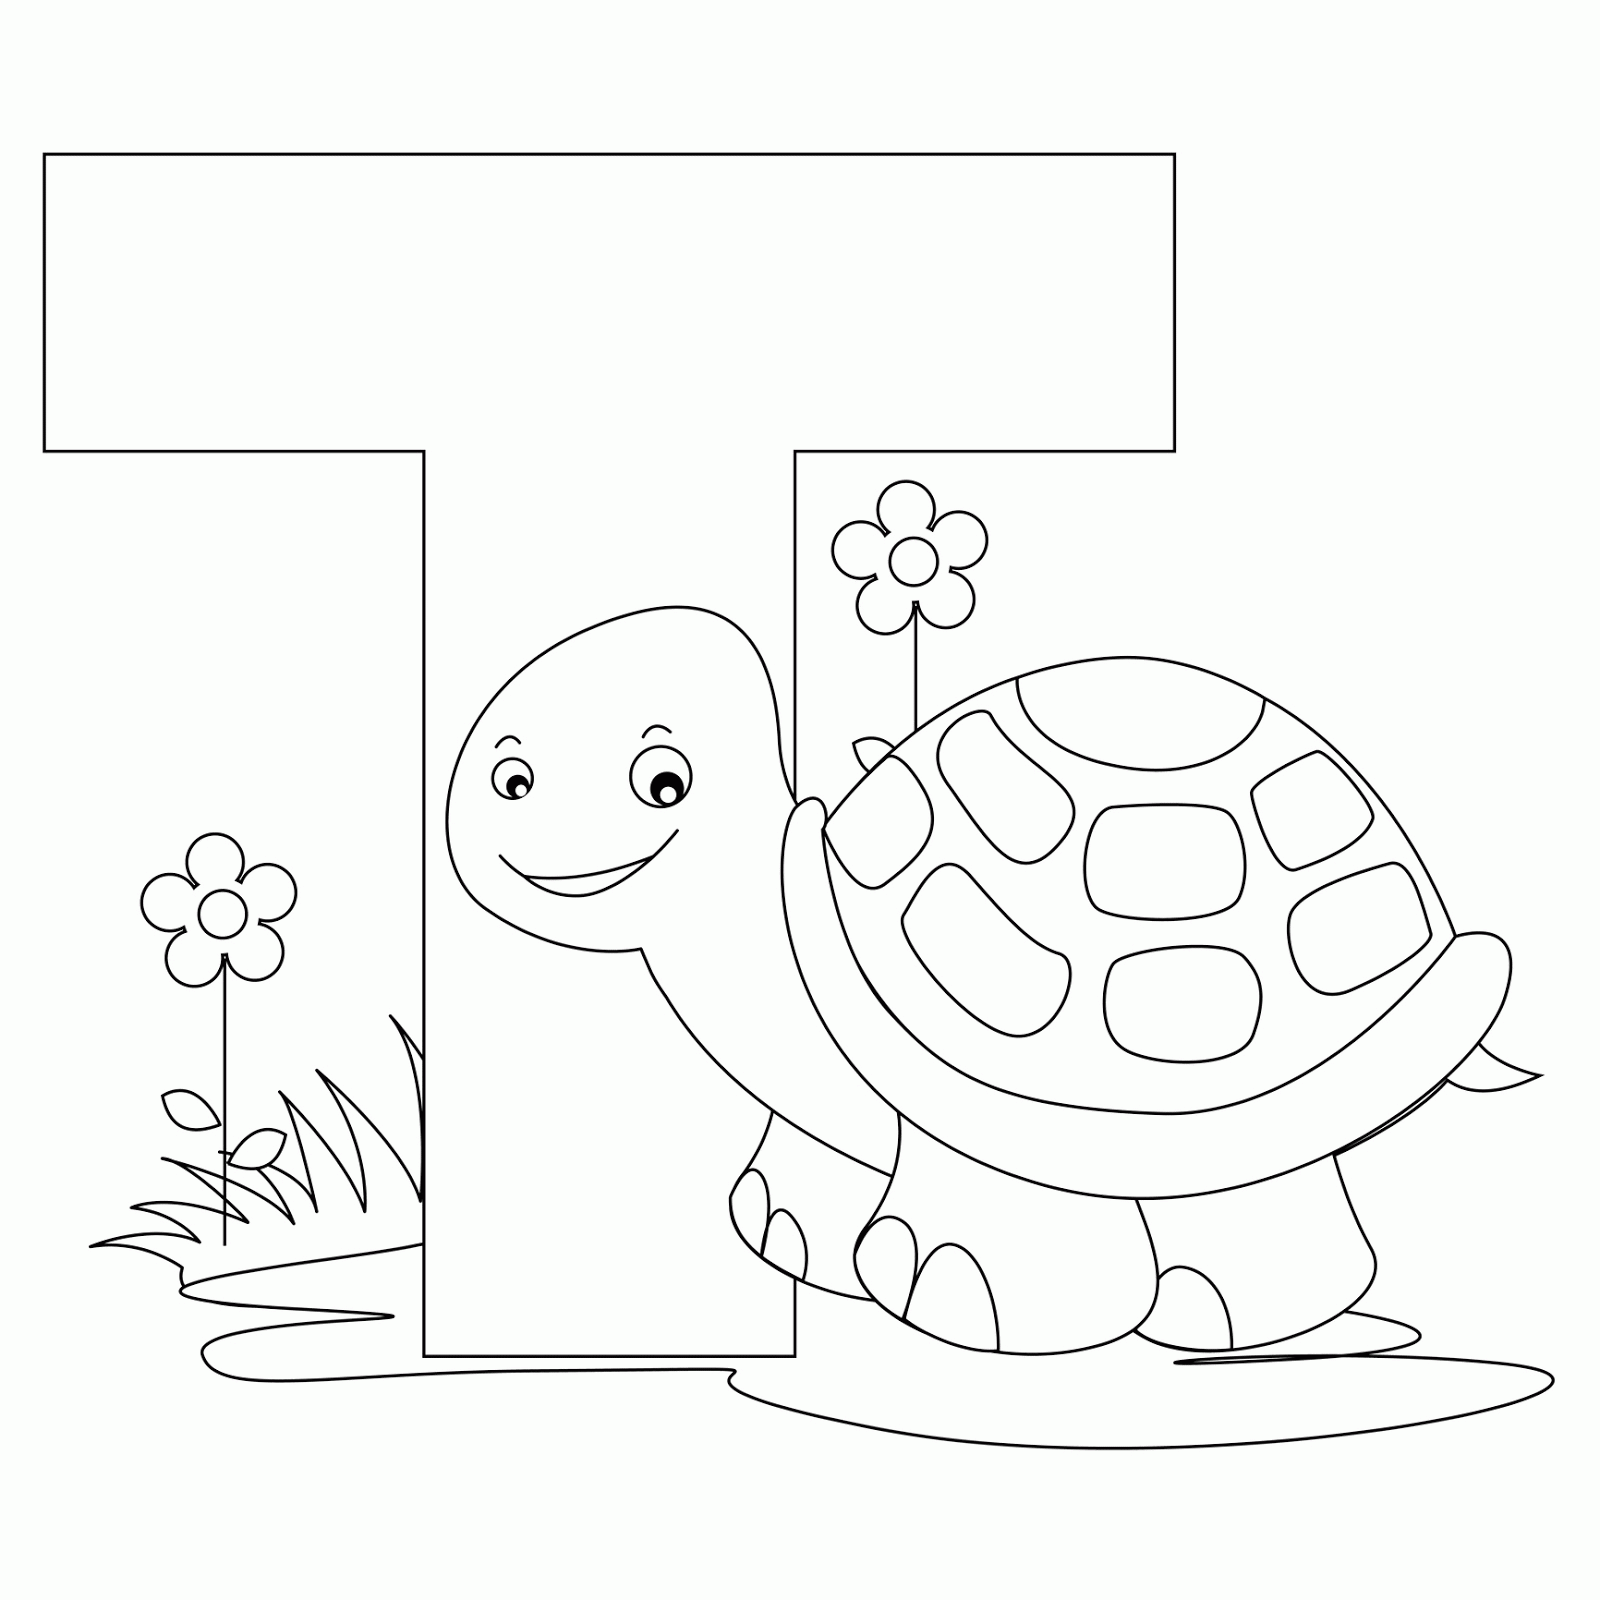 Coloring Pages For Letter A For Preschoolers - Coloring Page